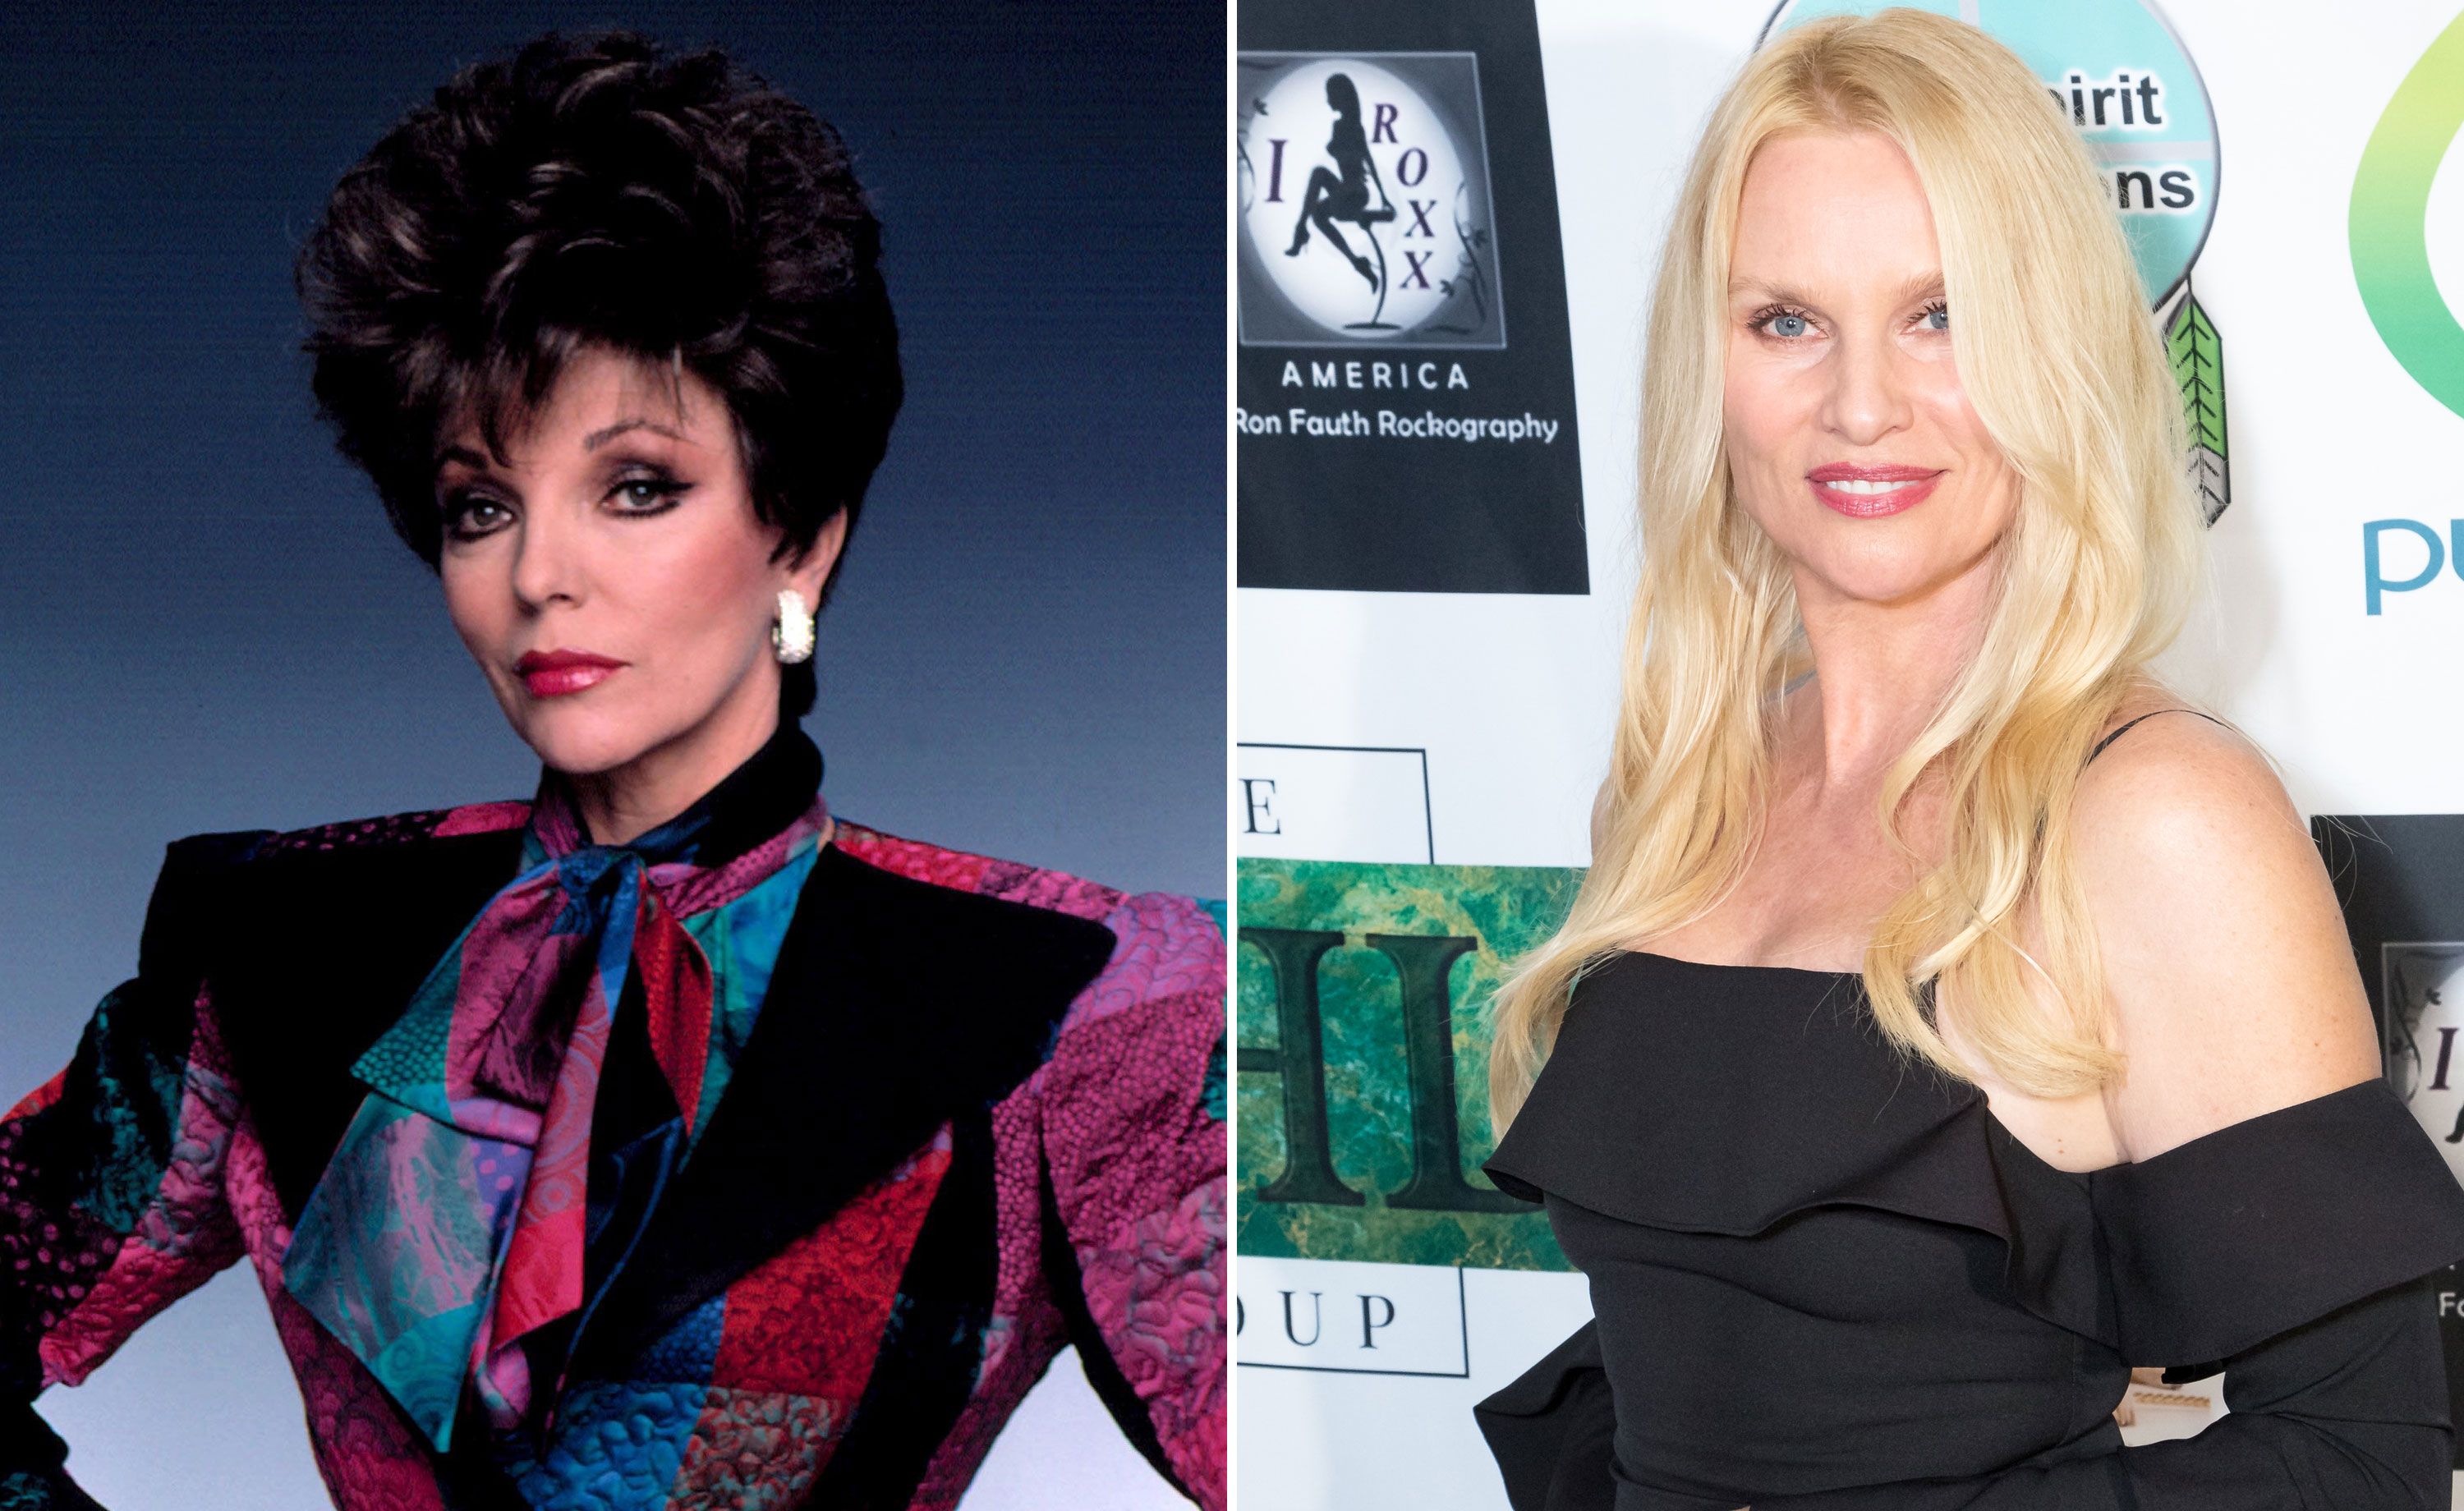 Dynasty casts Desperate Housewives Nicollette Sheridan as the new Alexis Carrington